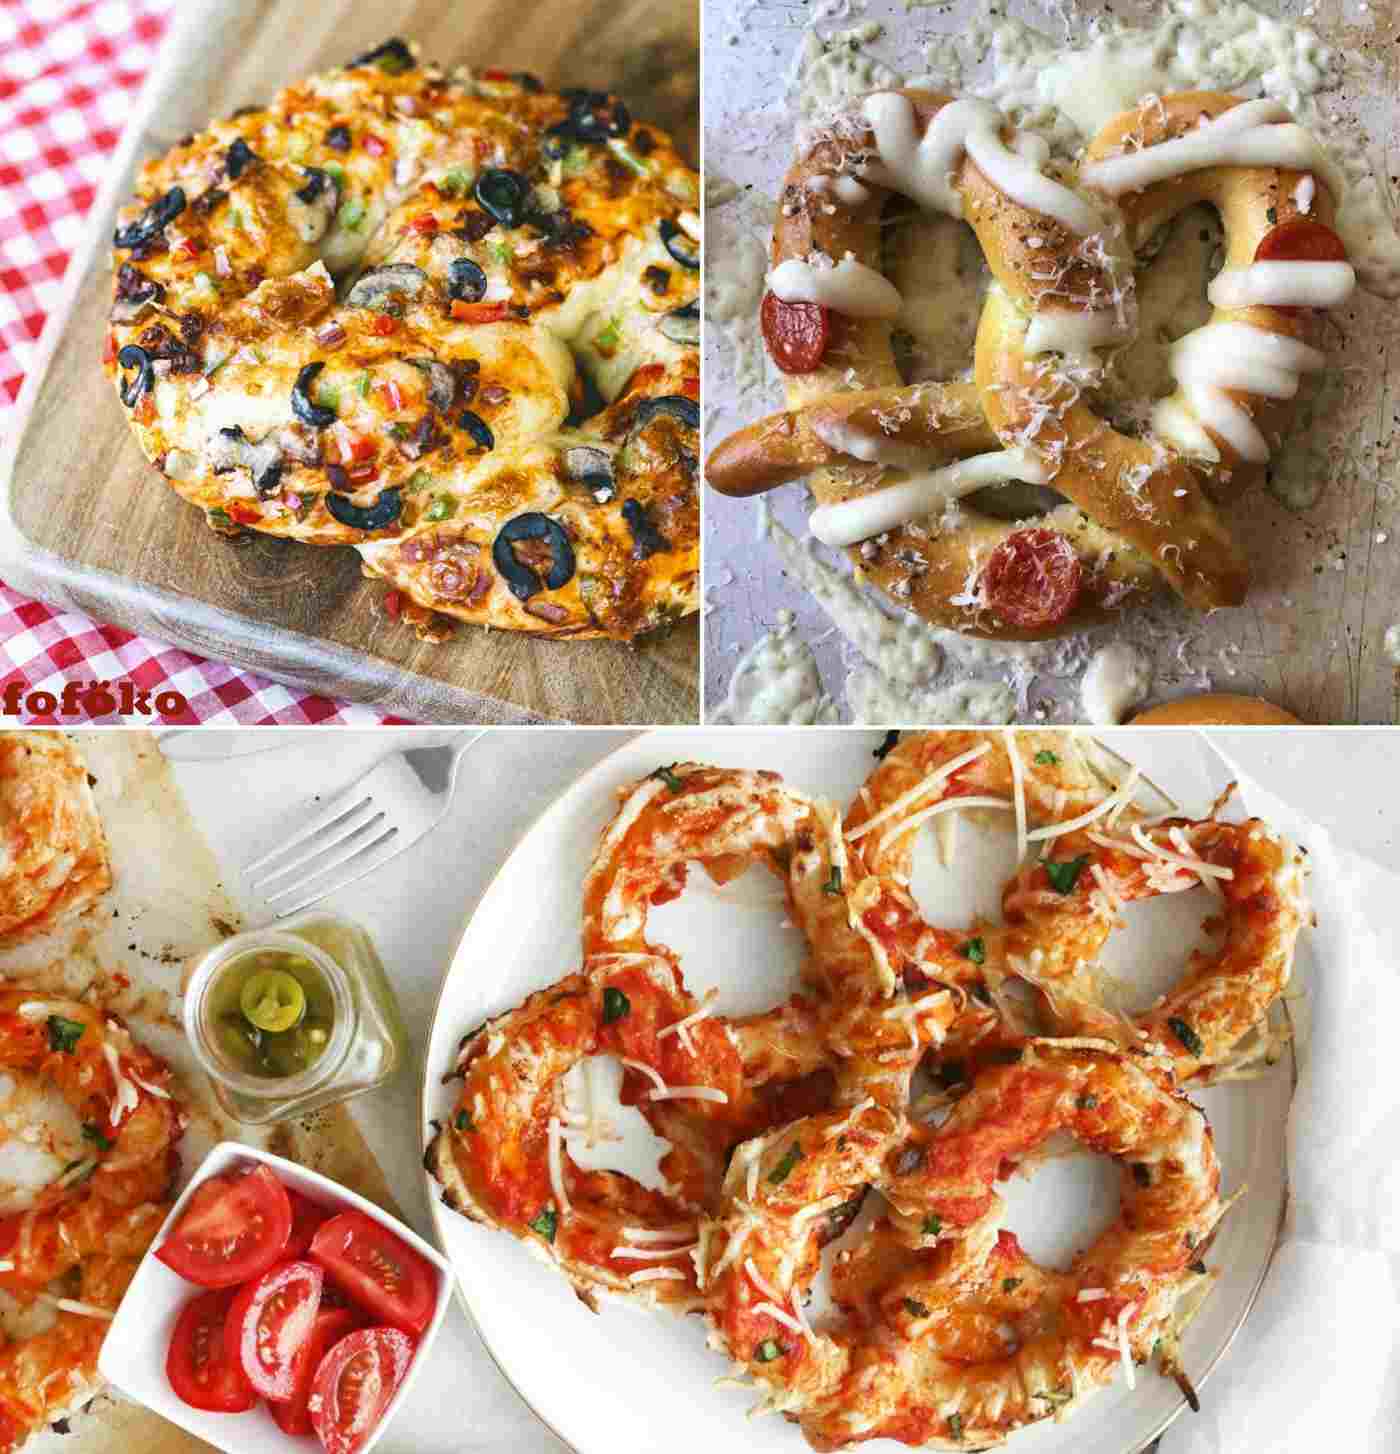 Bake bread and coat a pizza with favorite ingredients like olives or paprika